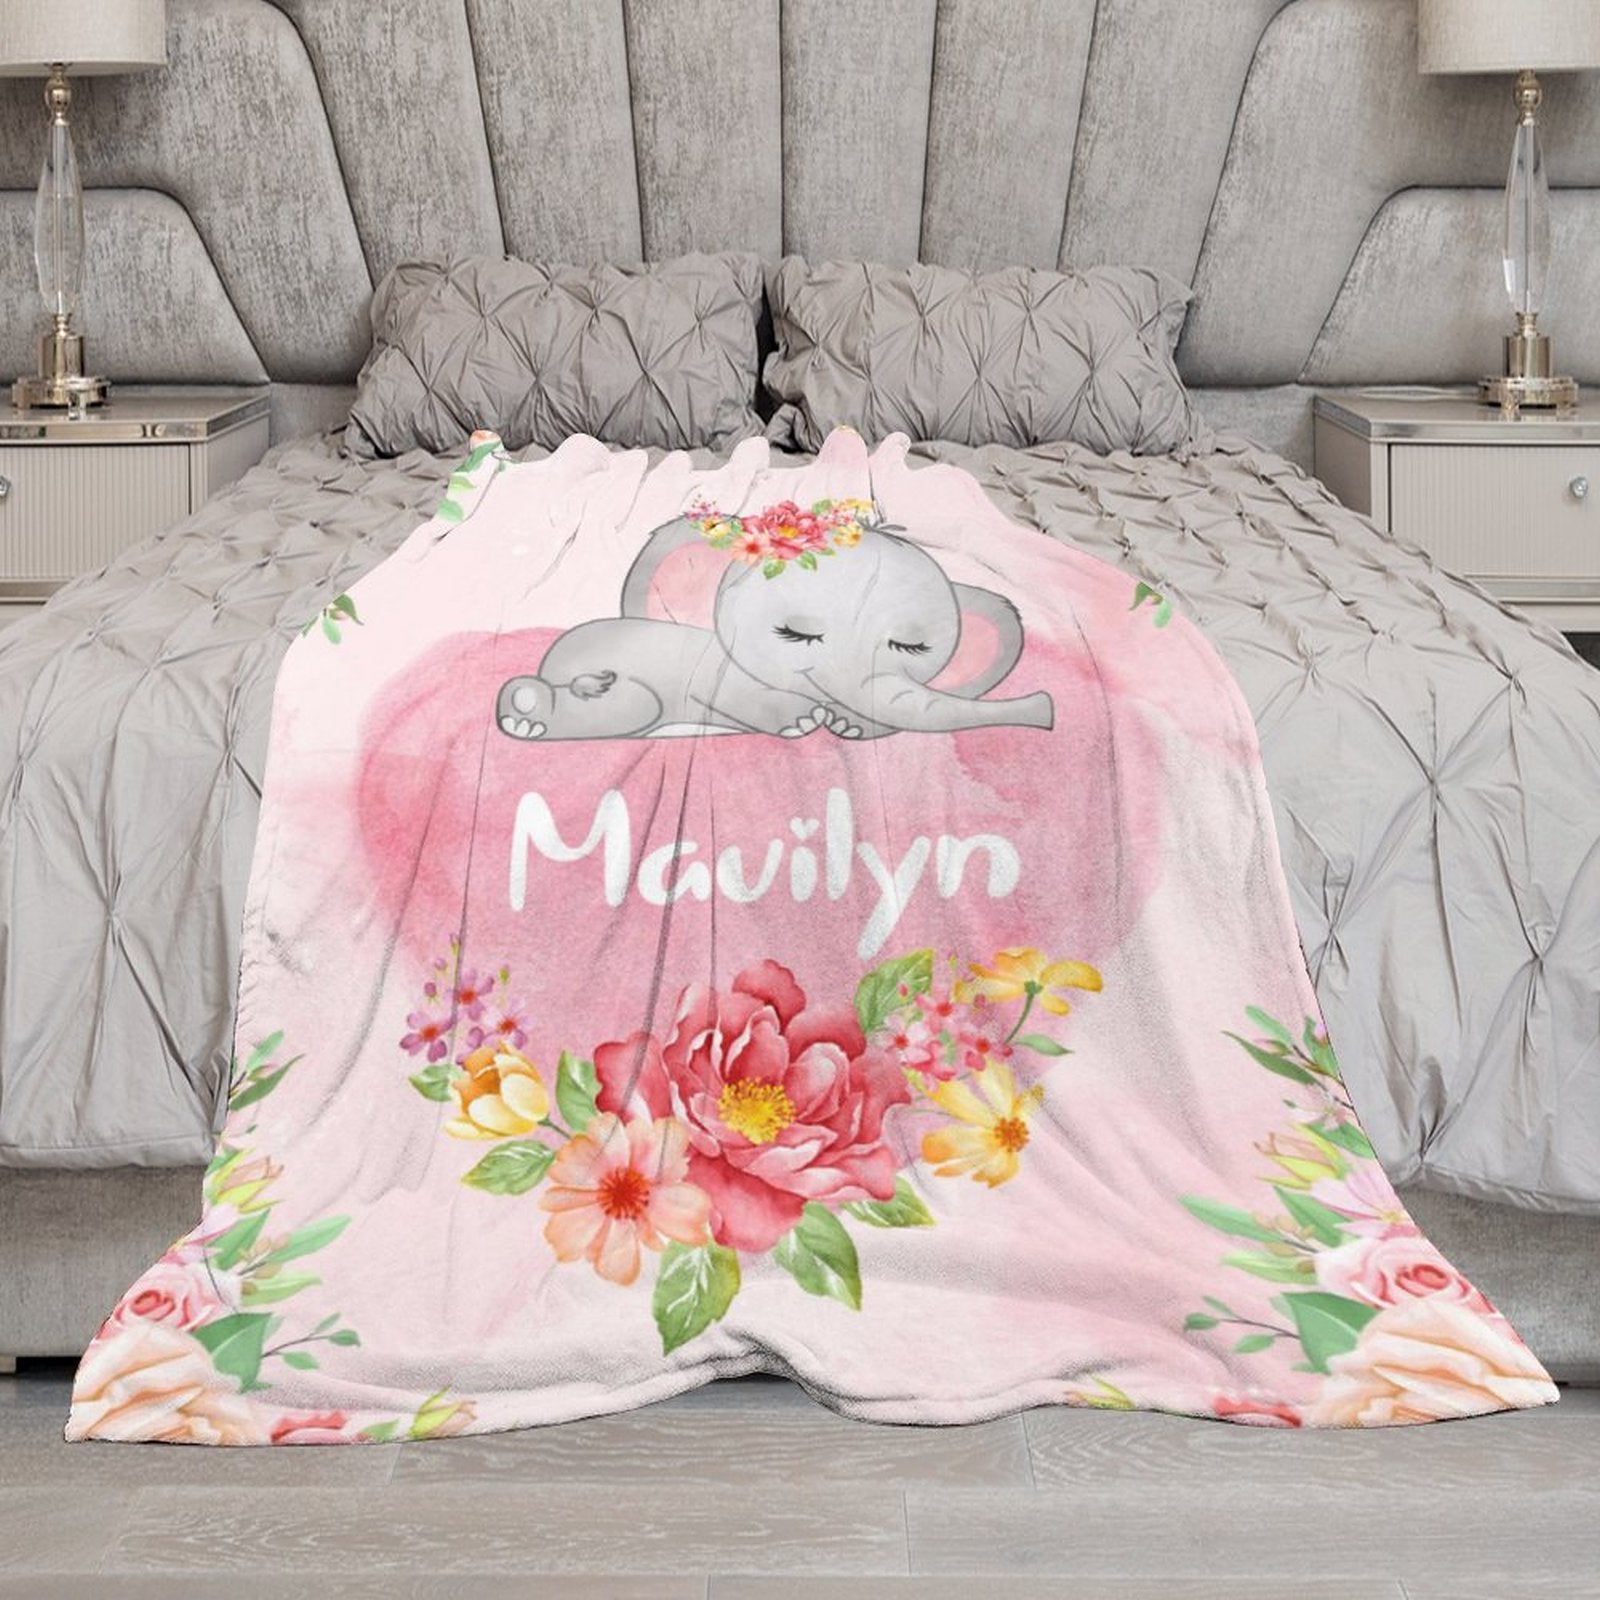 Free Shipping✈️ Customized Baby Blanket with Name, Floral Design Soft Throw Blanket, Anniversary Gift for Baby - colorfulcustom